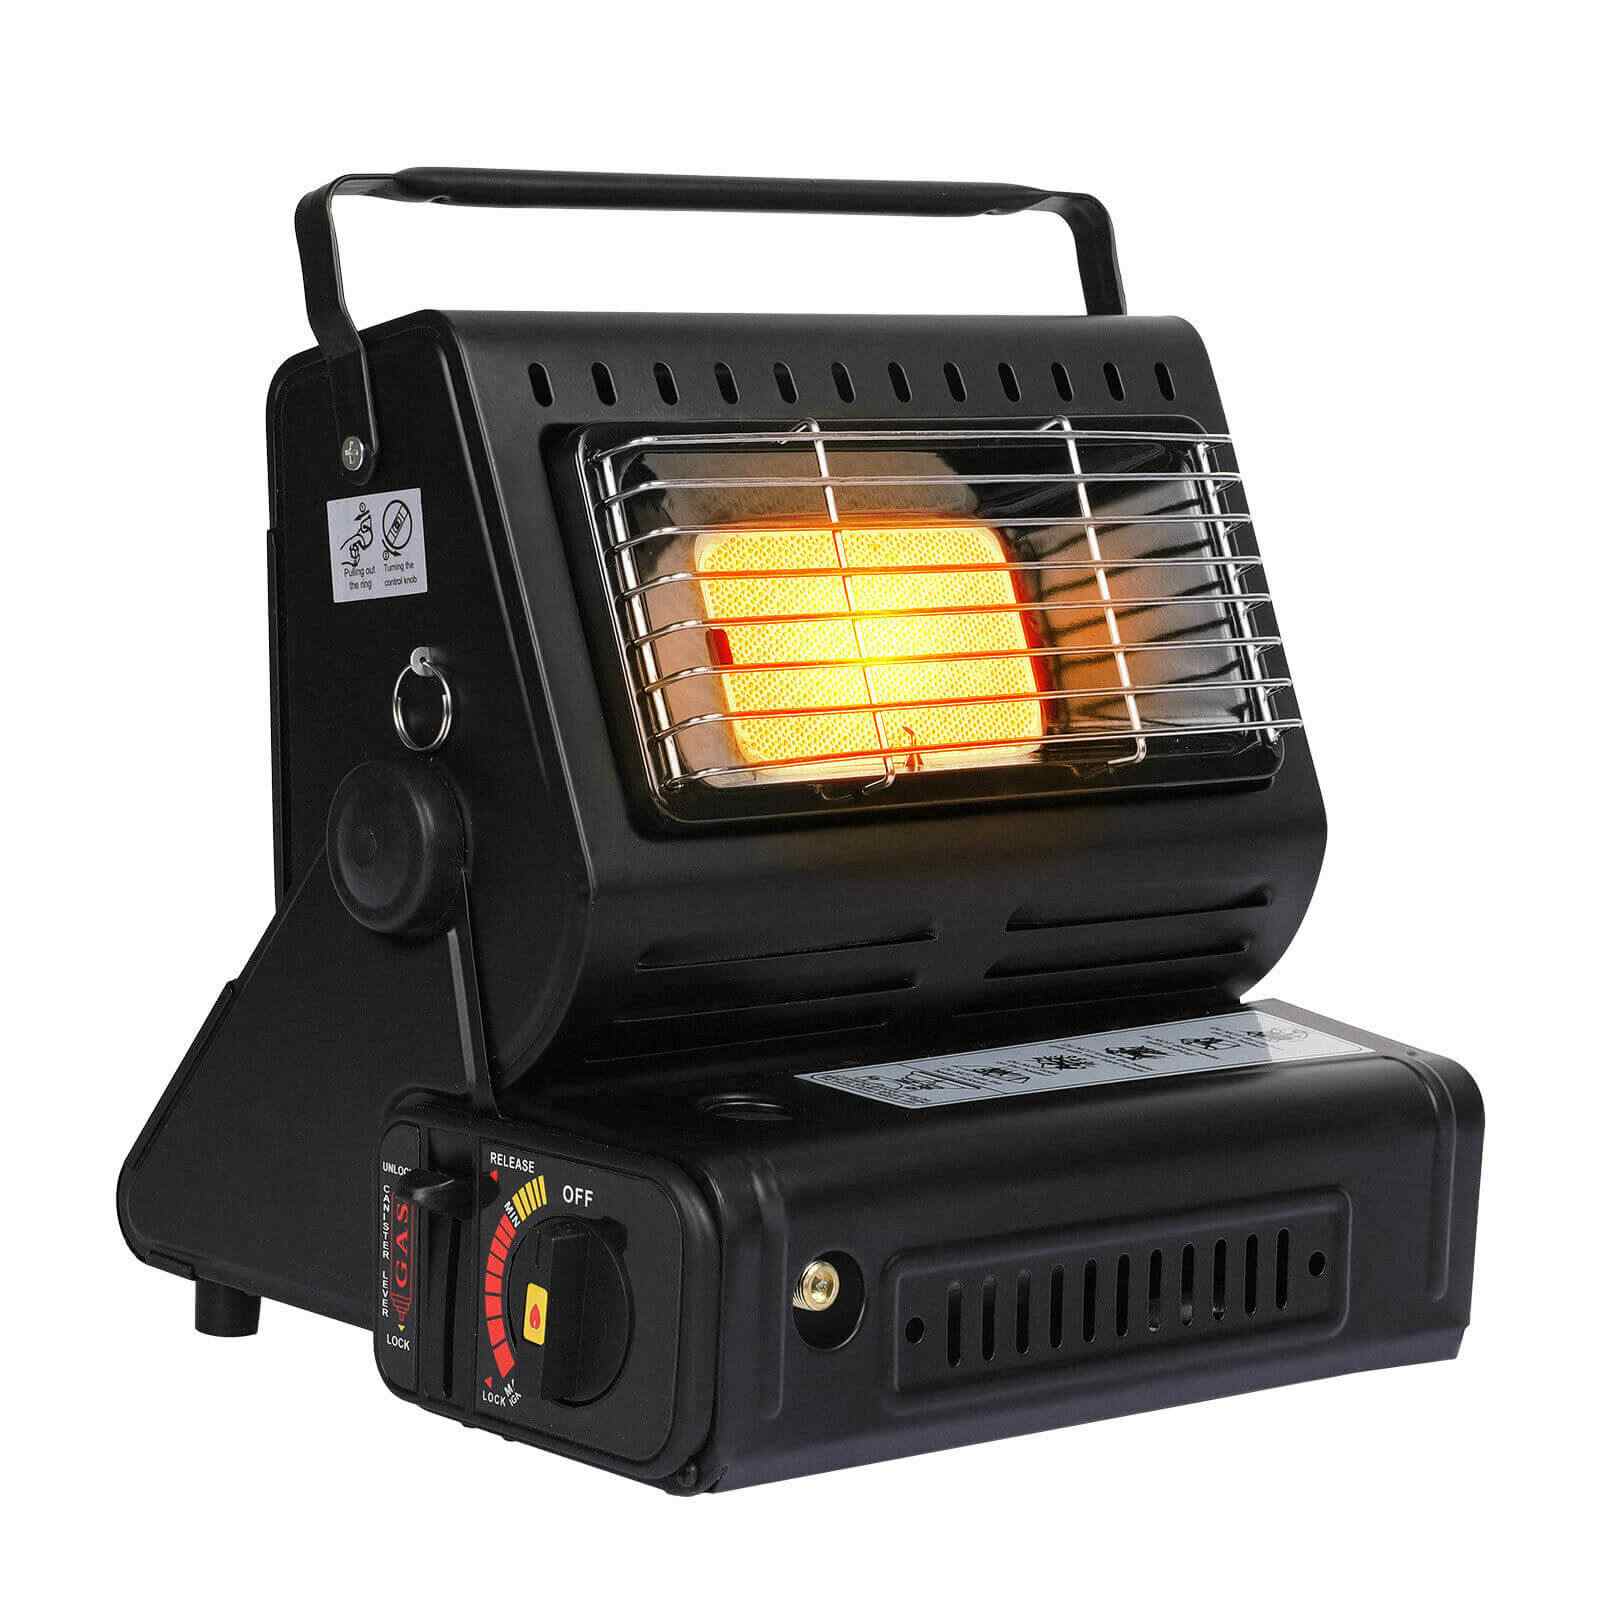 Portable 2 in 1 GAS Butane Heater Camping Stove